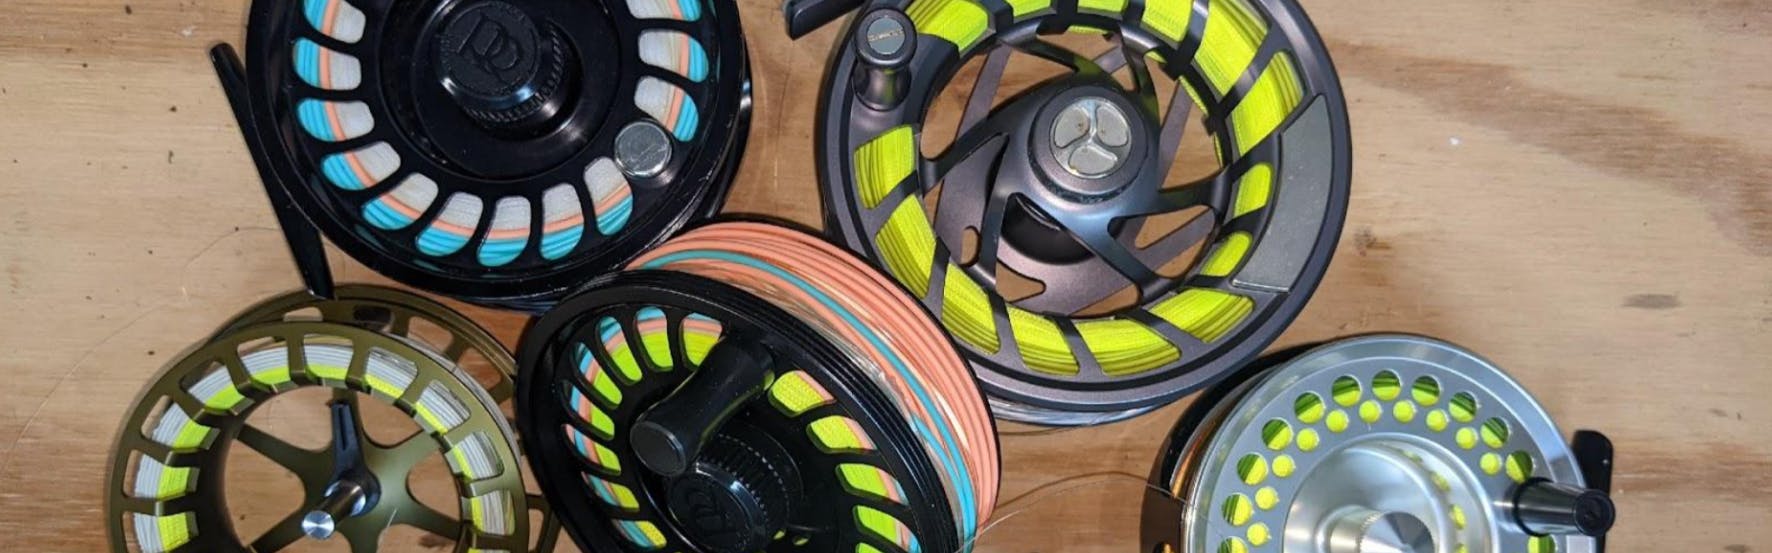 Click and Pawl Fly Reels: What are they and why should you try one? -  Flylords Mag